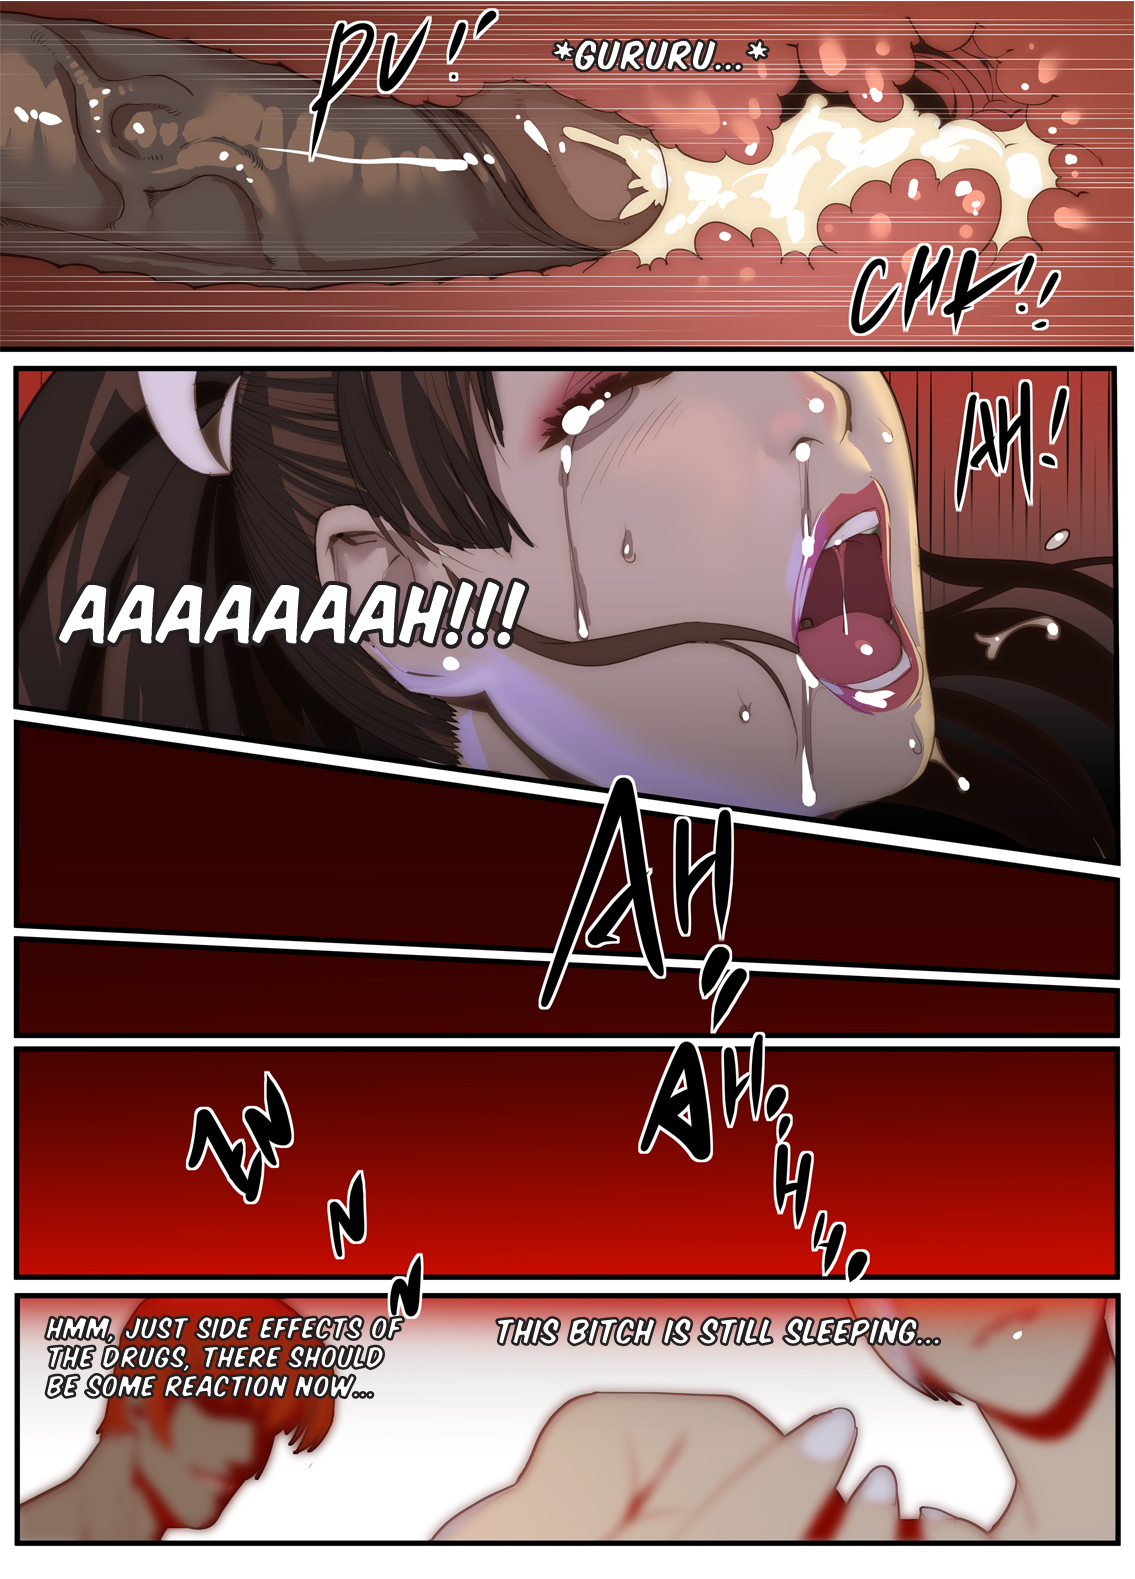 [chunlieater] The Lust of Mai Shiranui (King of Fighters) [English] [Yorkchoi & Twist] page 39 full